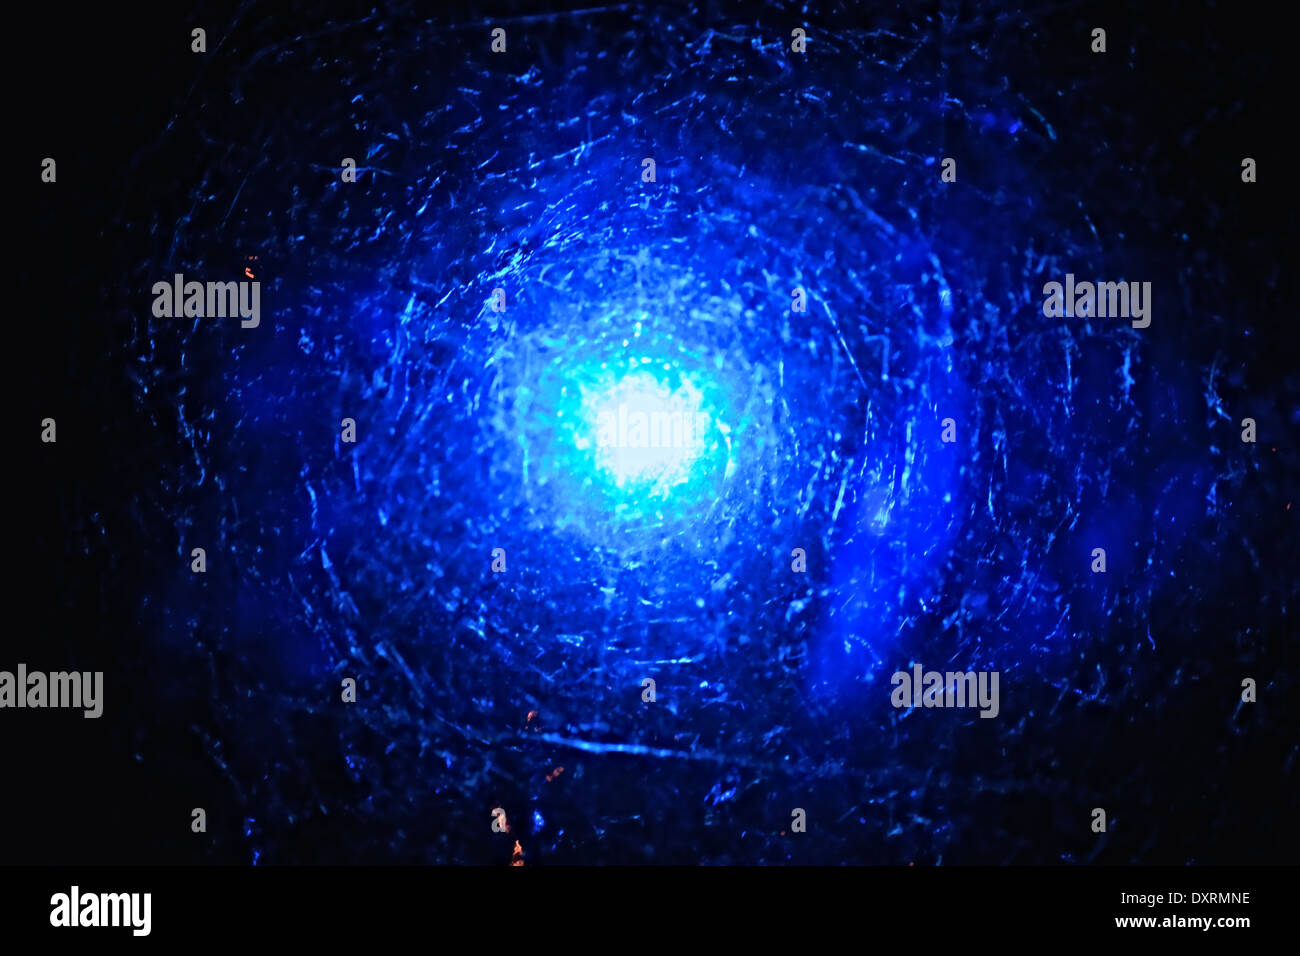 Abstract blue space background close up Stock Photo